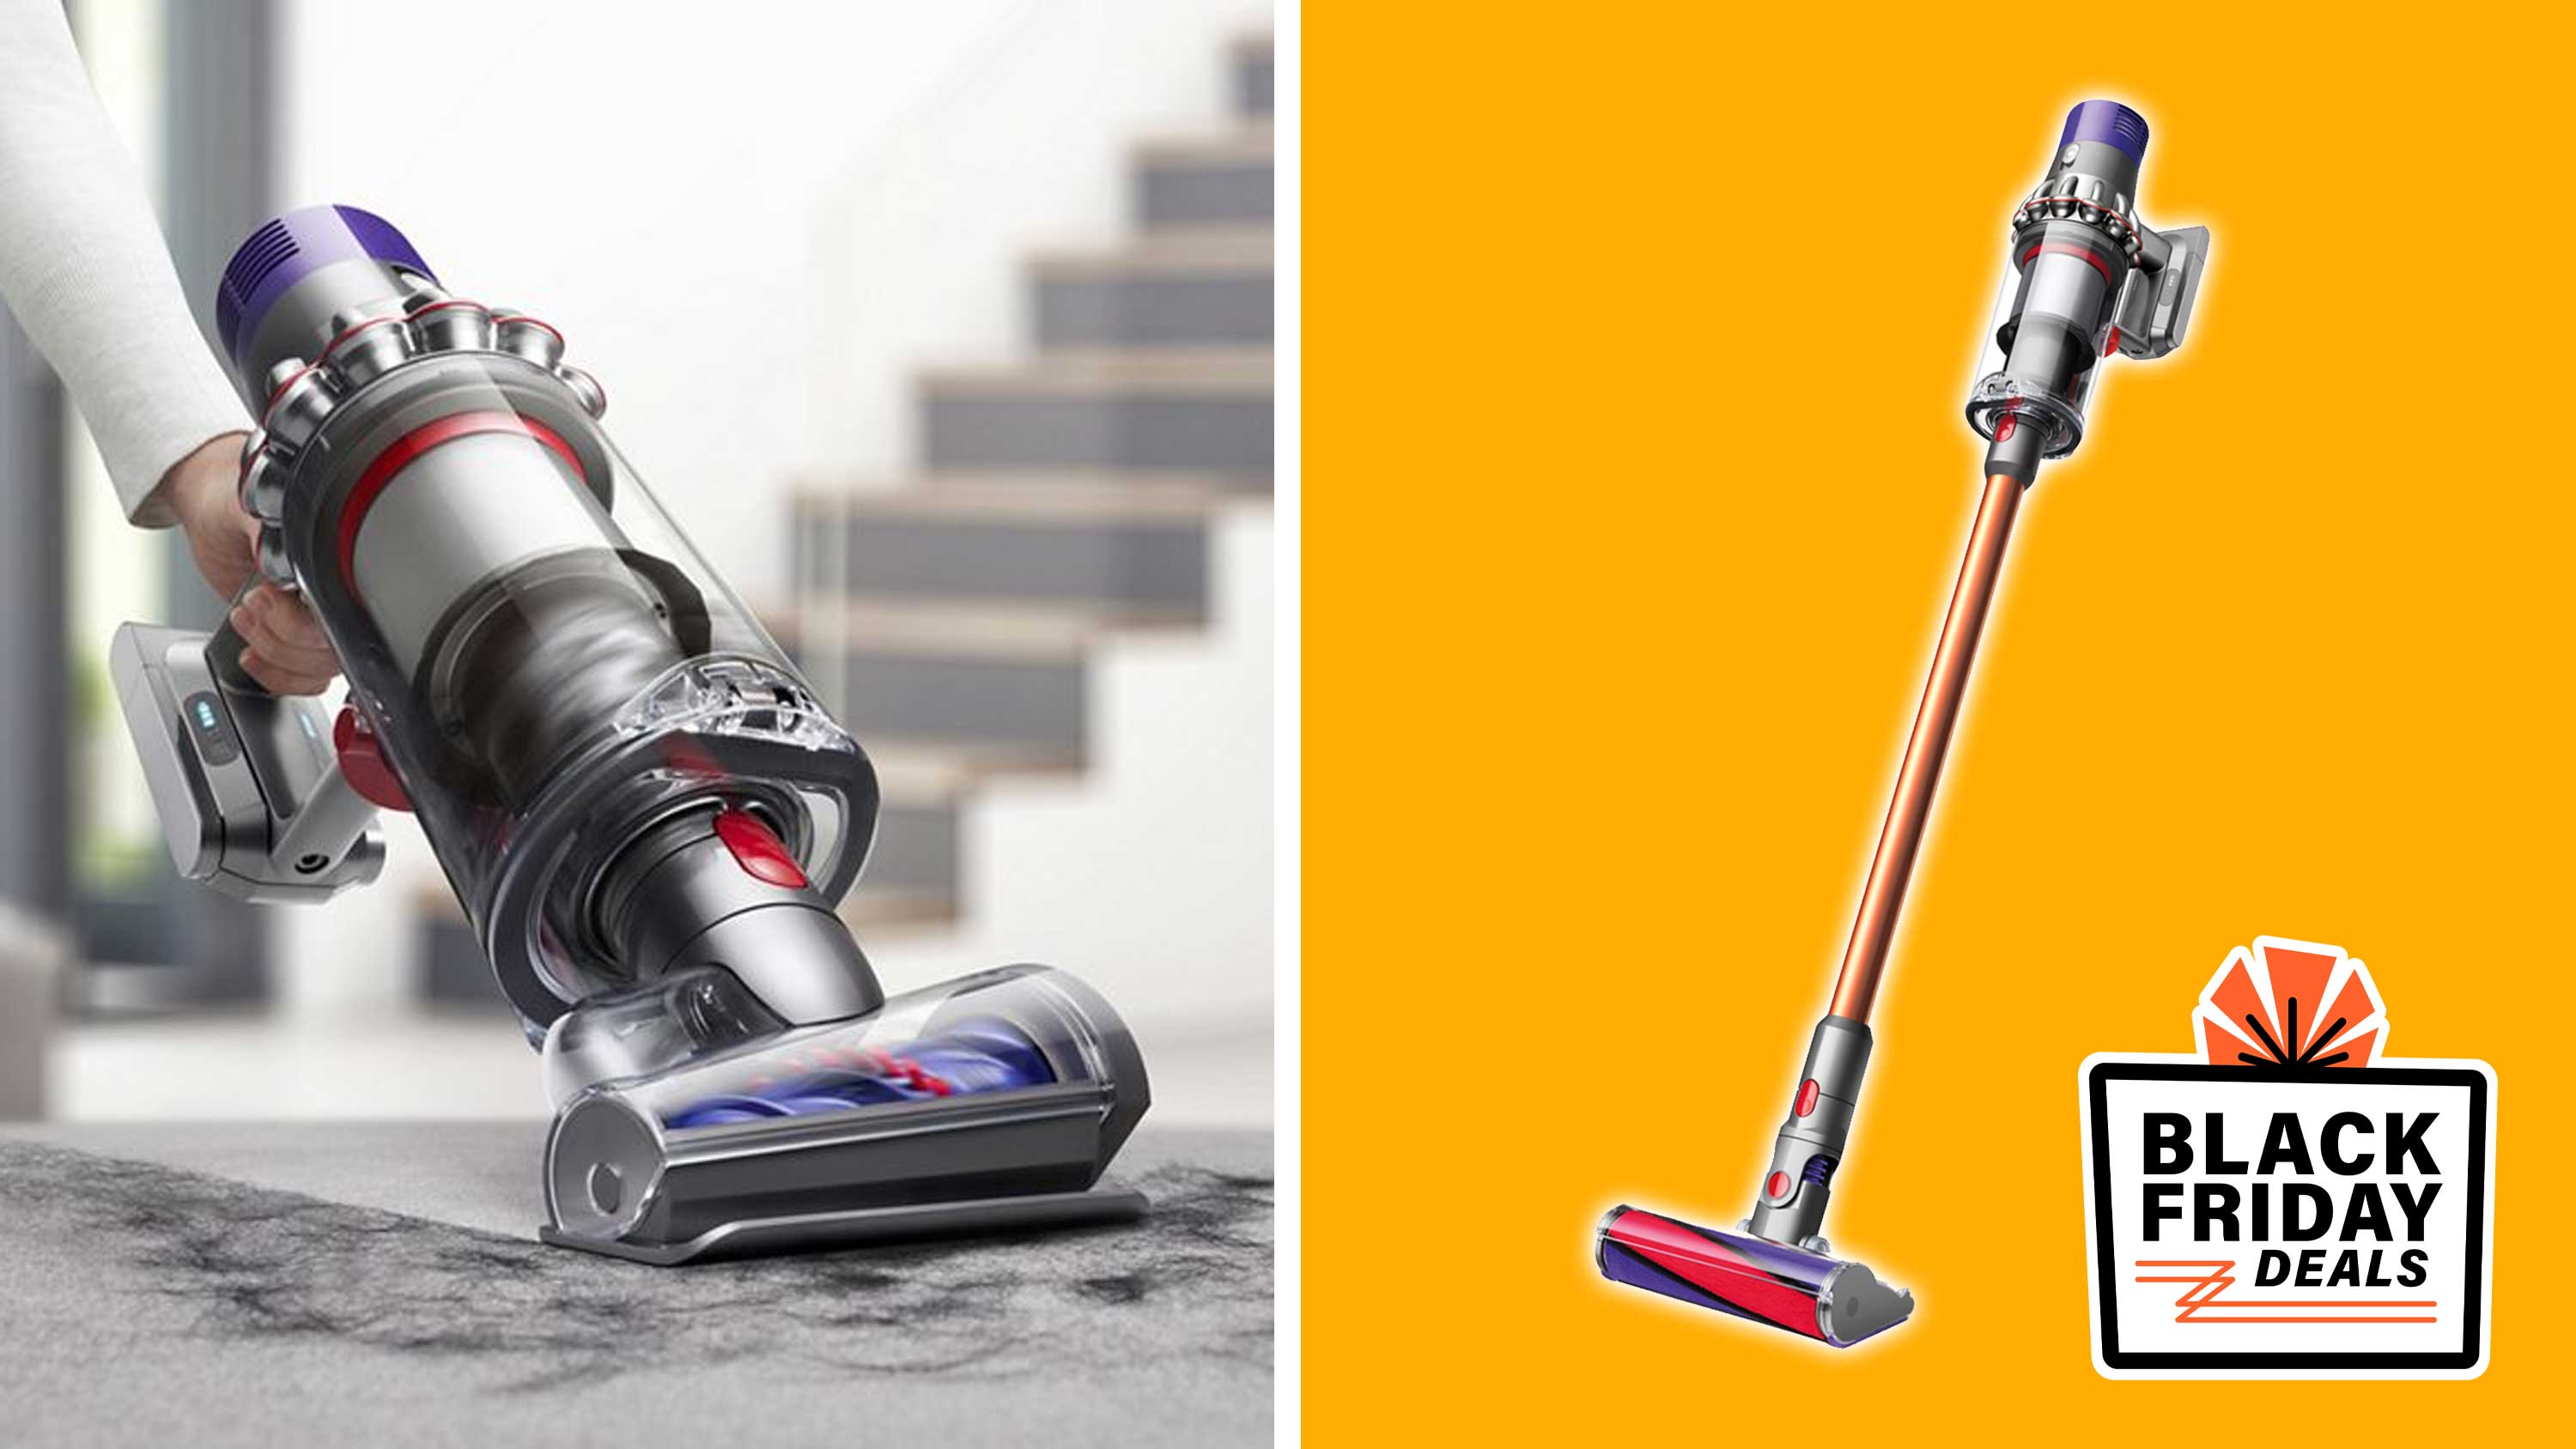 Looking to Buy The Dyson V10: 9 Things You Must Know Before Purchasing The Cyclone Cordless Vacuum